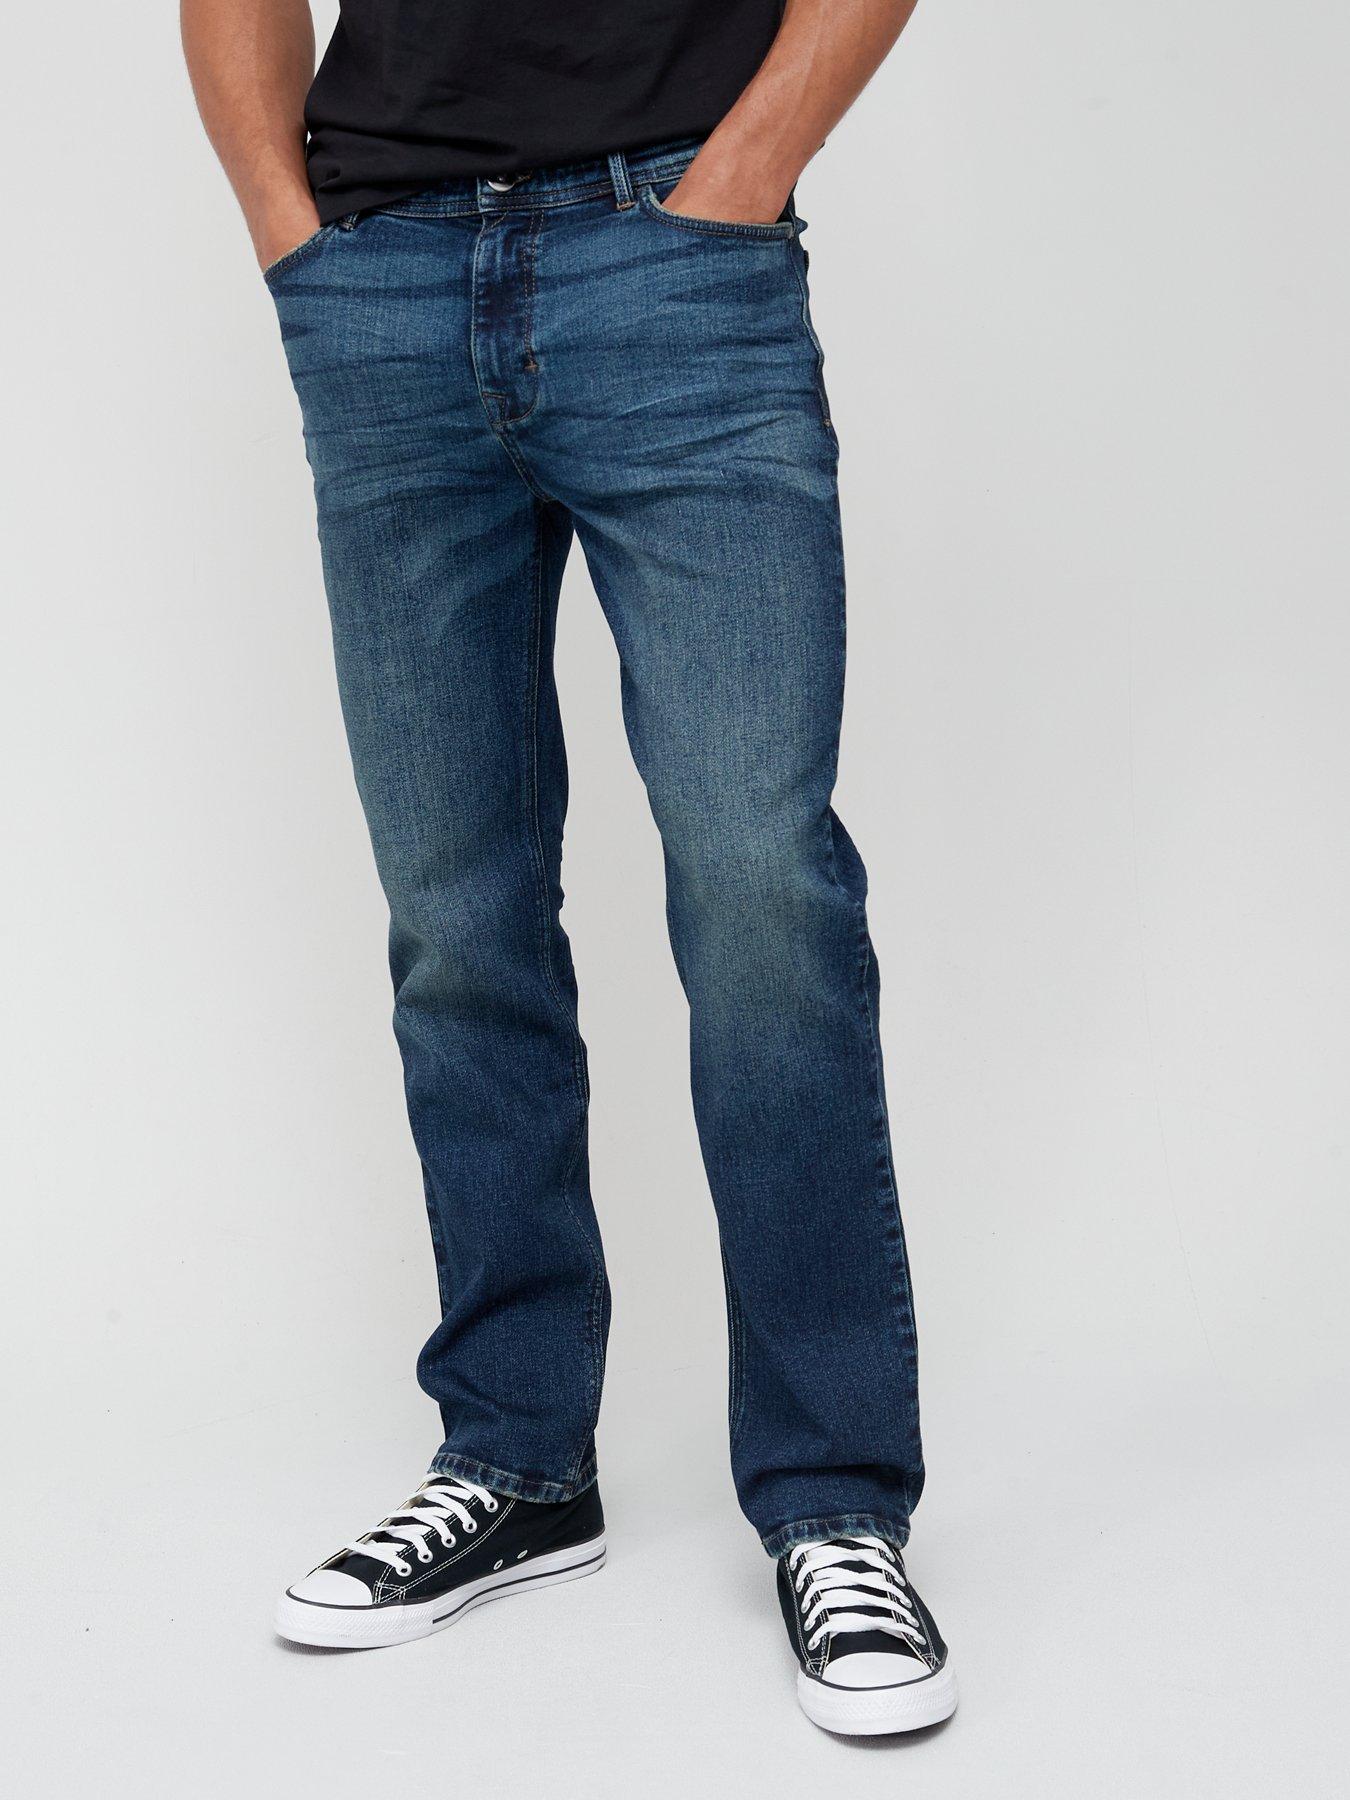 Mens Clothing Jeans Straight-leg jeans PT01 Denim Jeans in Charcoal Save 1% Blue for Men 